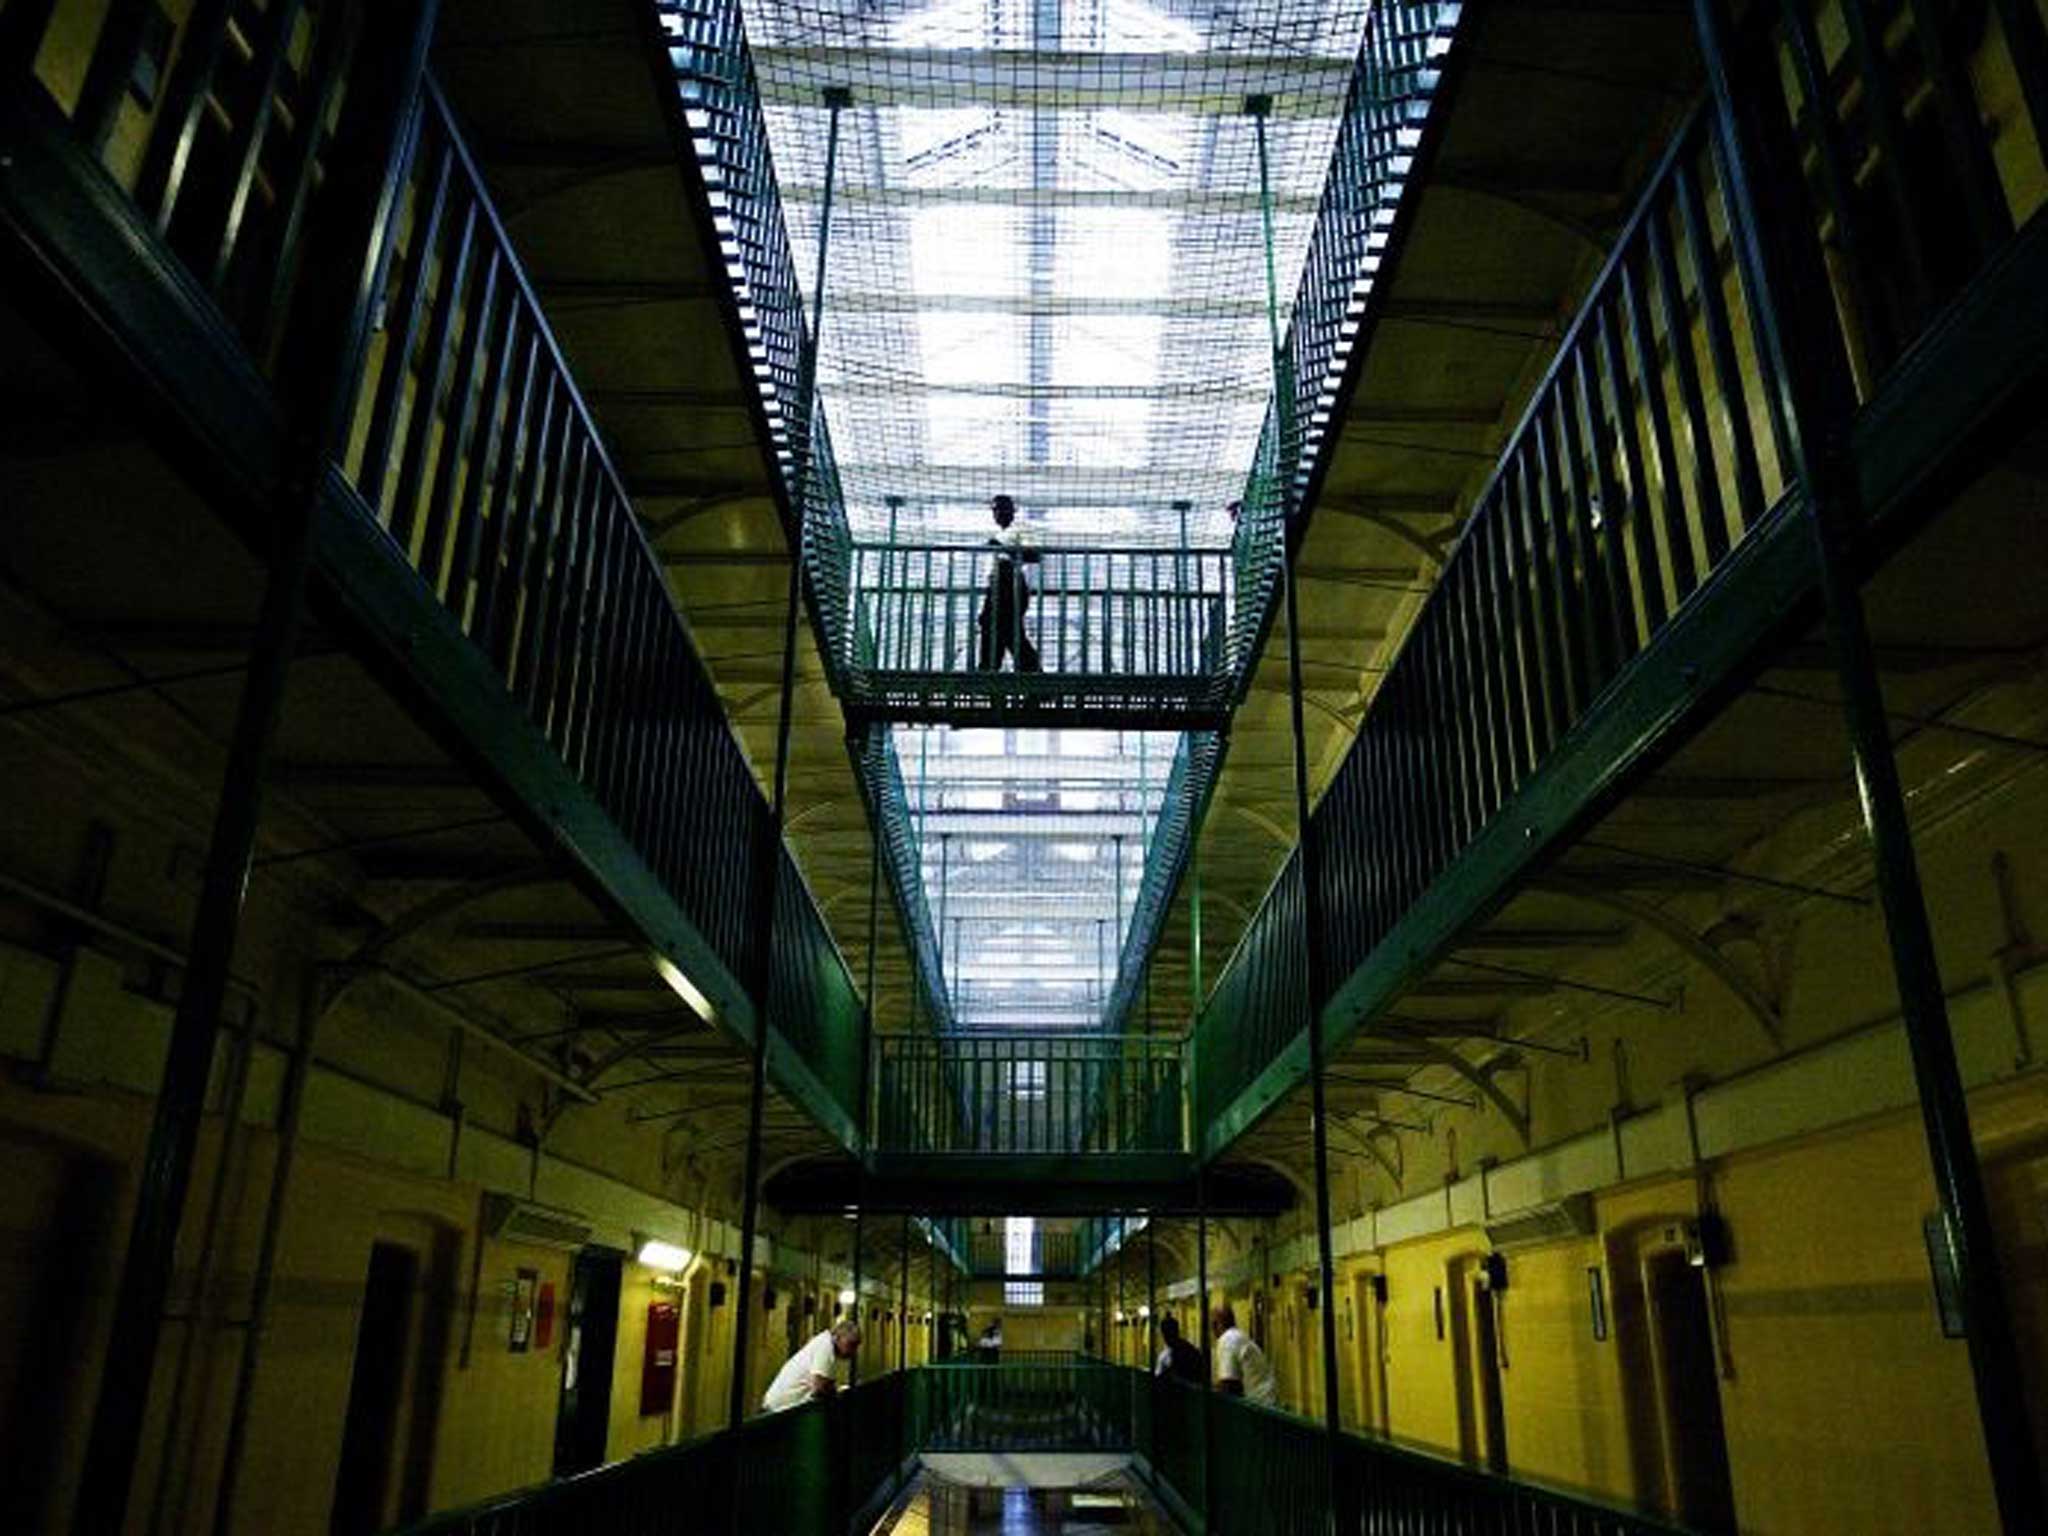 Self-harm incidents which required the prisoner to go to hospital soared by 35 per cent to 331 in women’s prisons in the last year